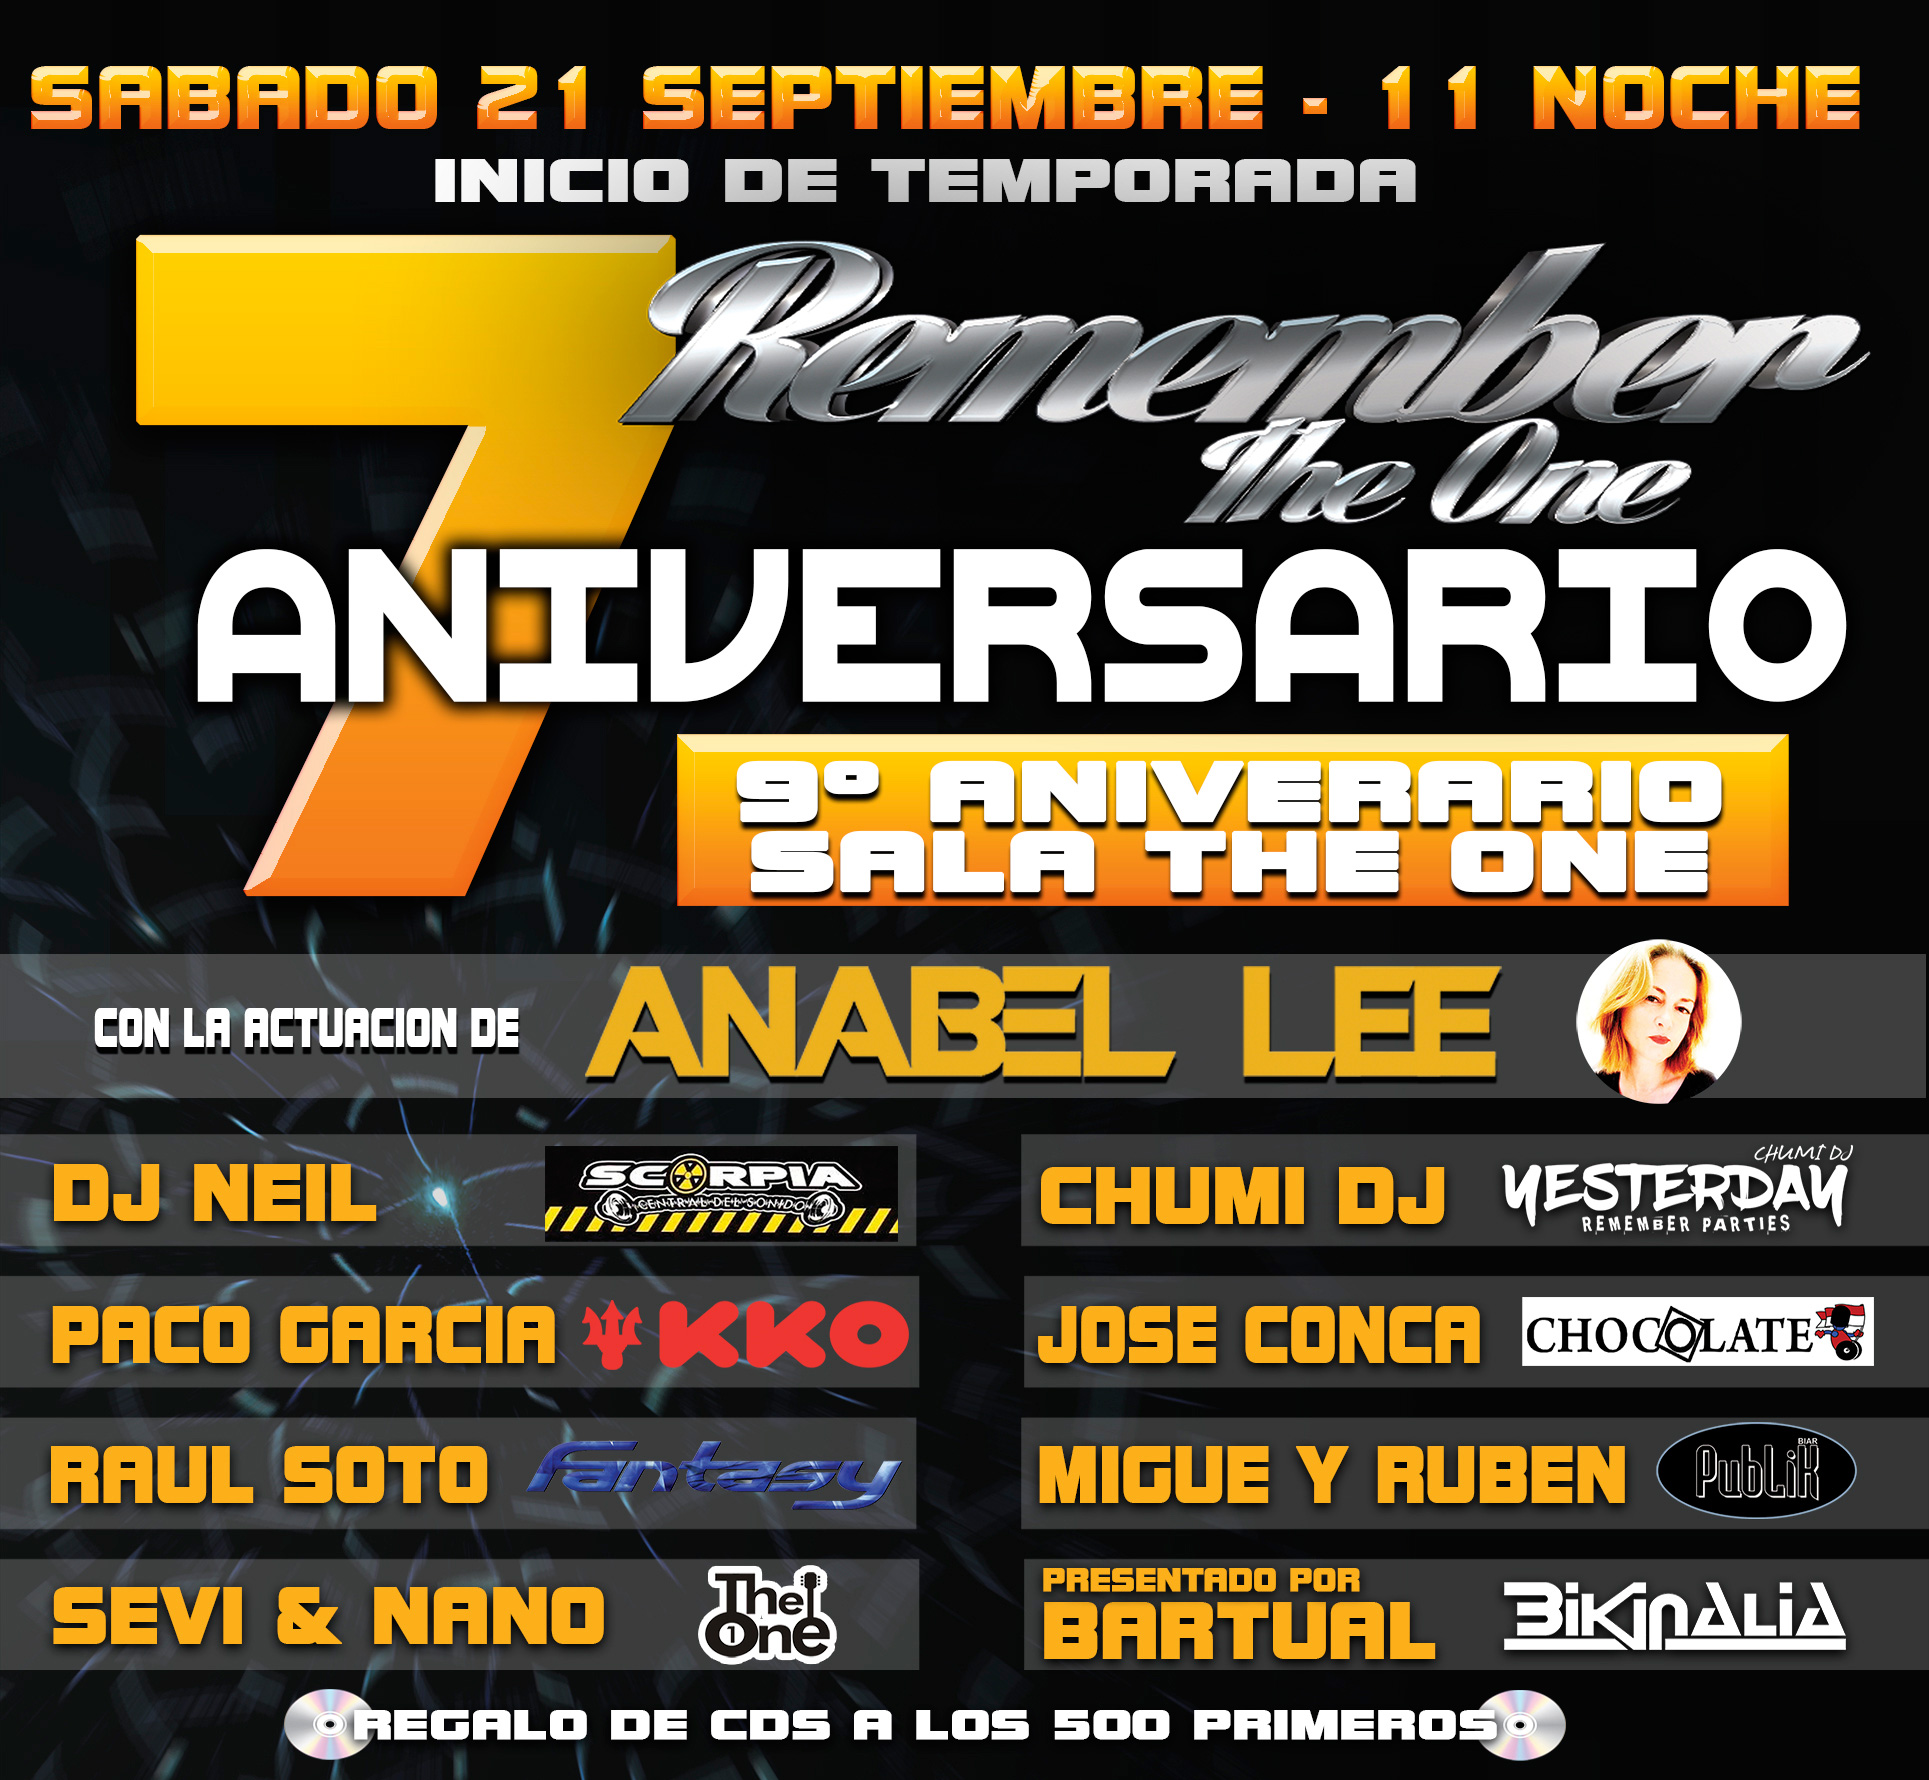 remember-the-one-21-septiembre-5d447627a